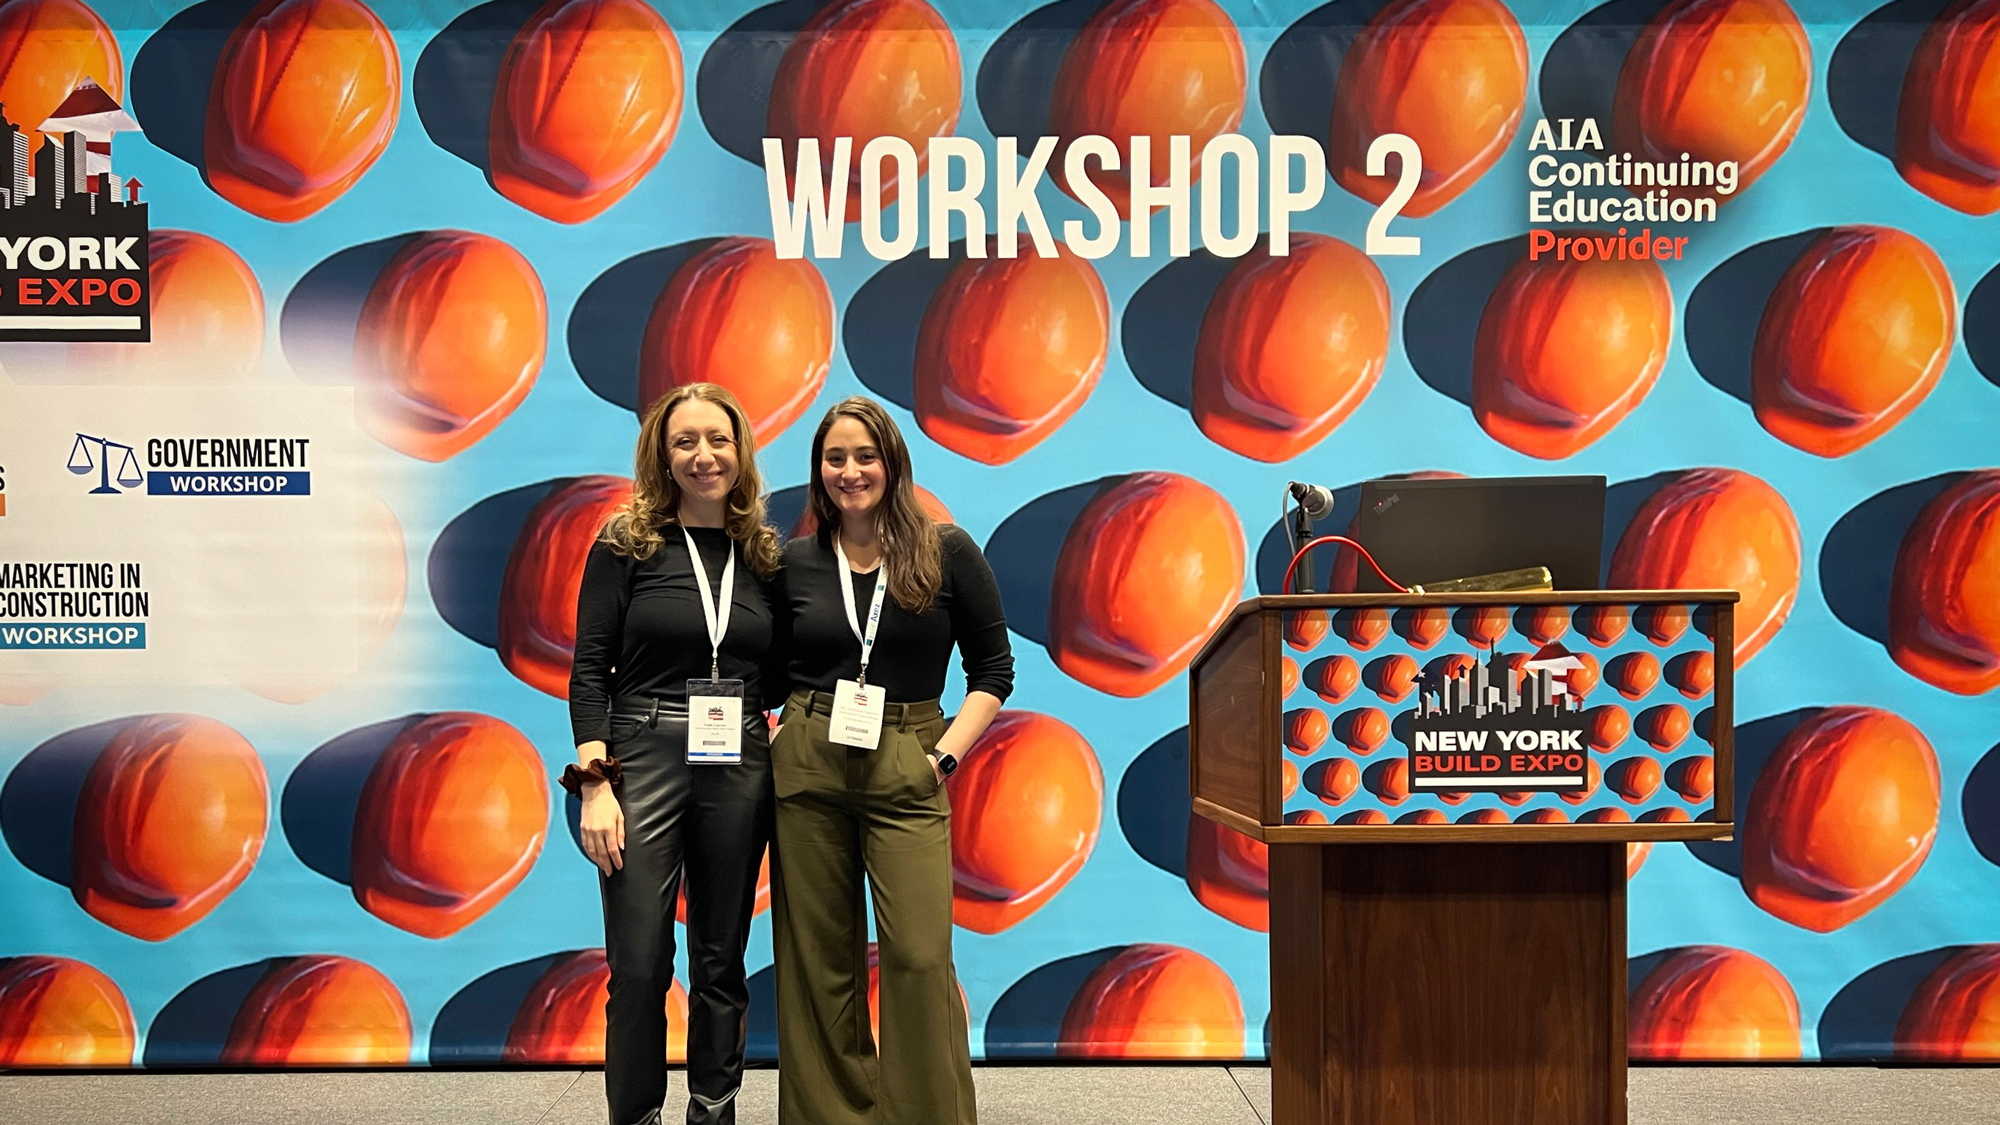 Two smiling women standing in front of a colorful backdrop with large printed hard hats, labeled "WORKSHOP 2" at the New York Build Expo, indicating a focus on construction and architecture.